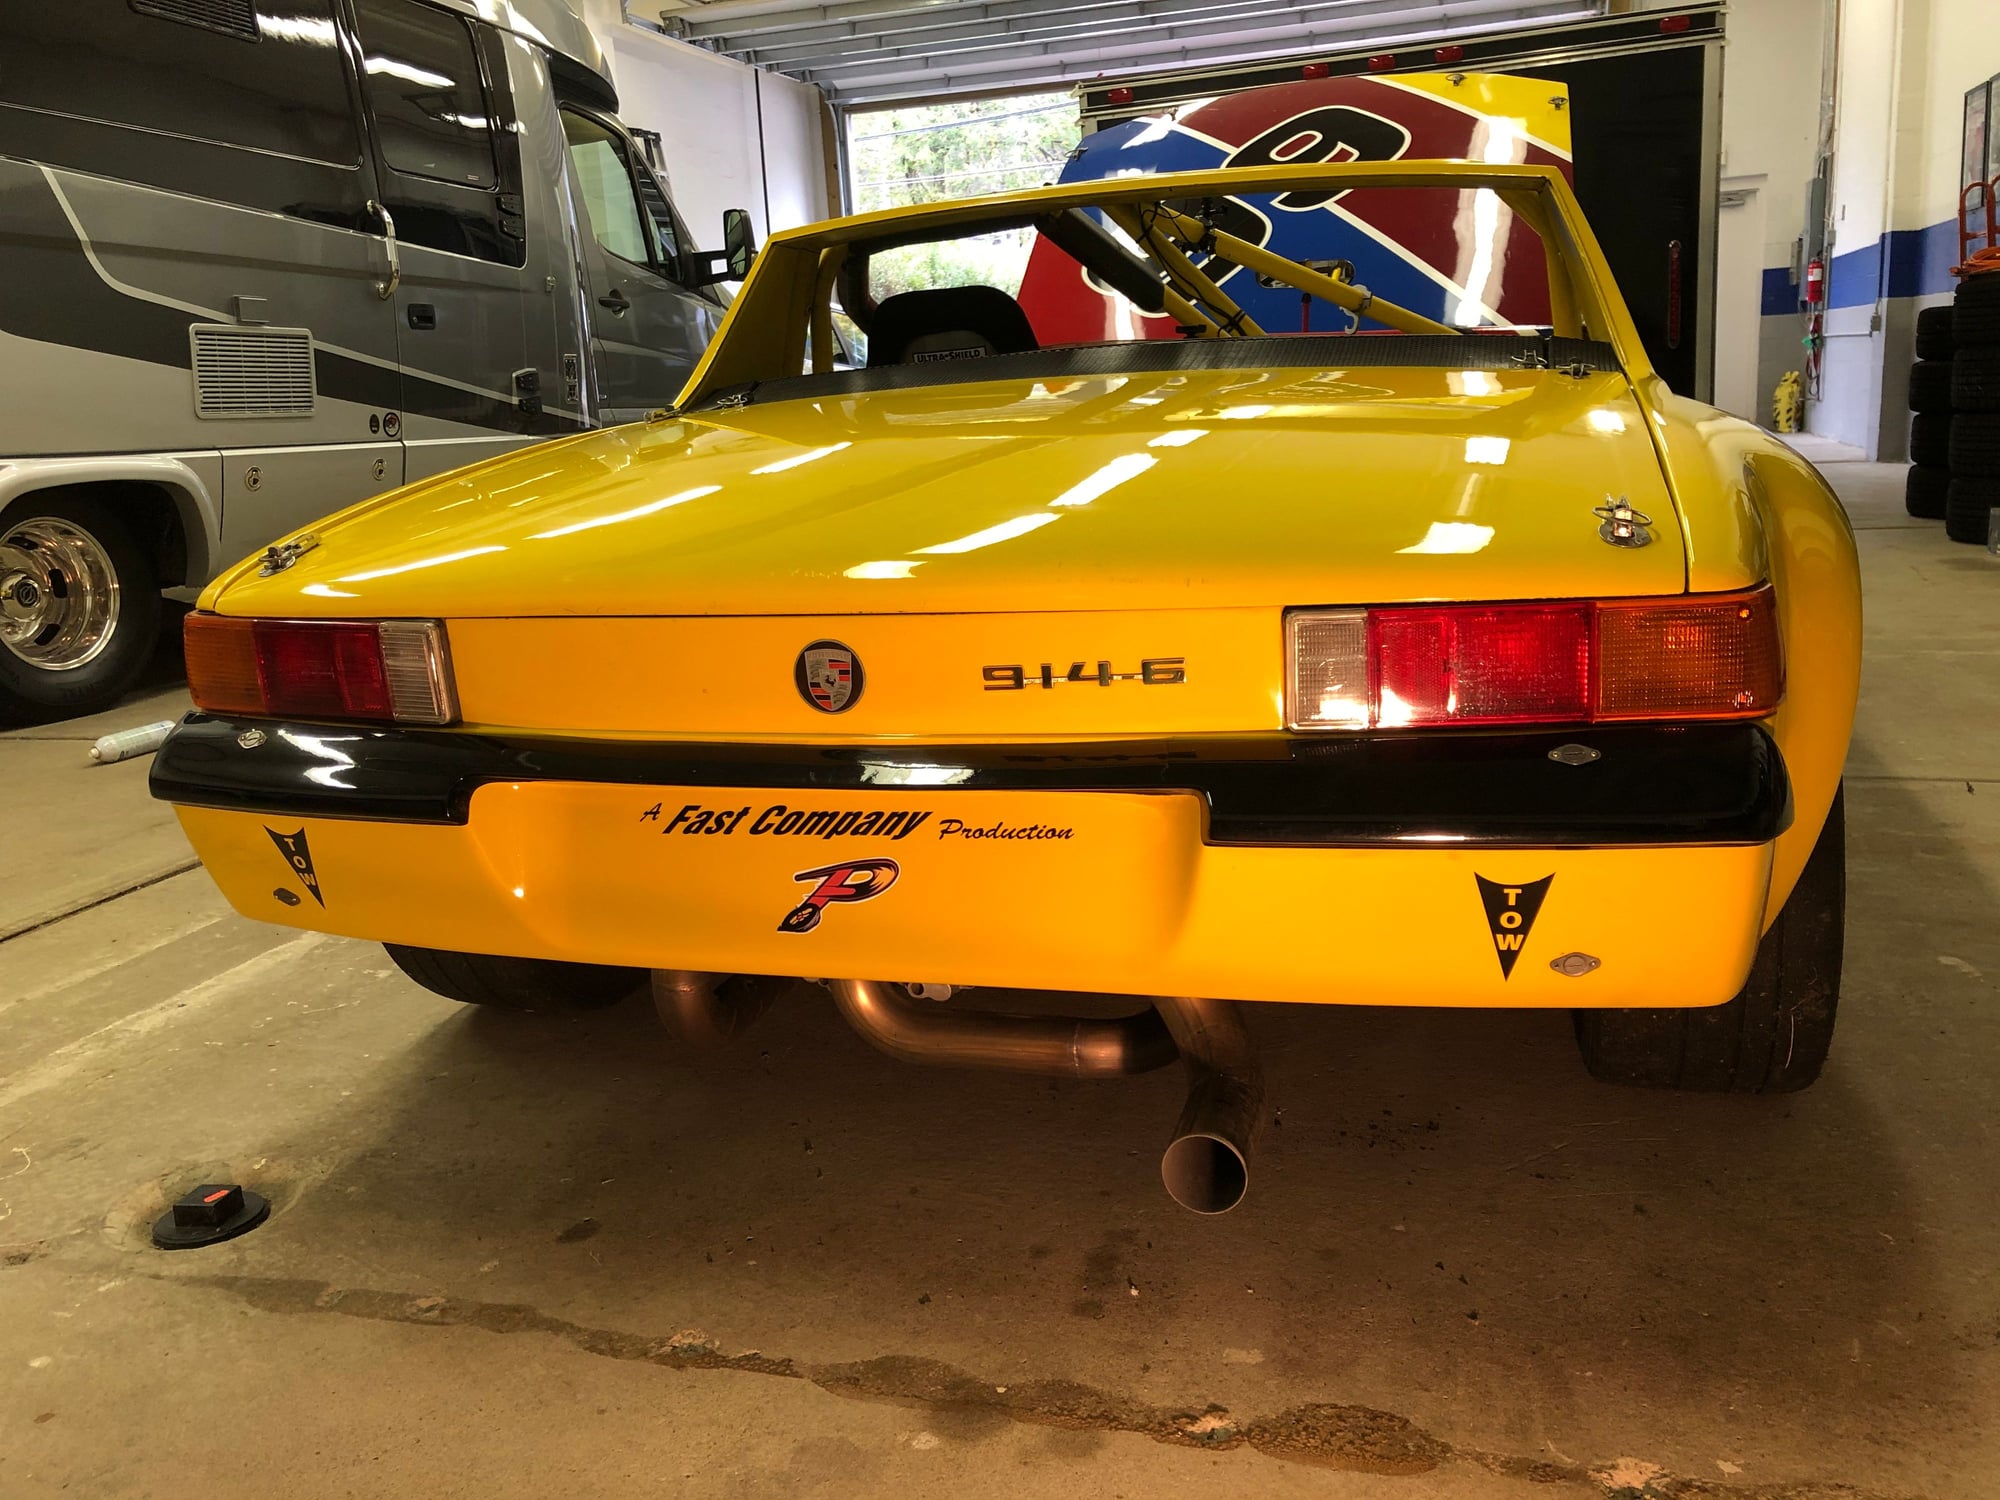 1972 Porsche 914 - 1972 914-6 GT Roadster Vintage Race Car - Used - VIN 4752905999 - 6 cyl - 2WD - Manual - Convertible - Yellow - Pittsburgh, PA 15228, United States